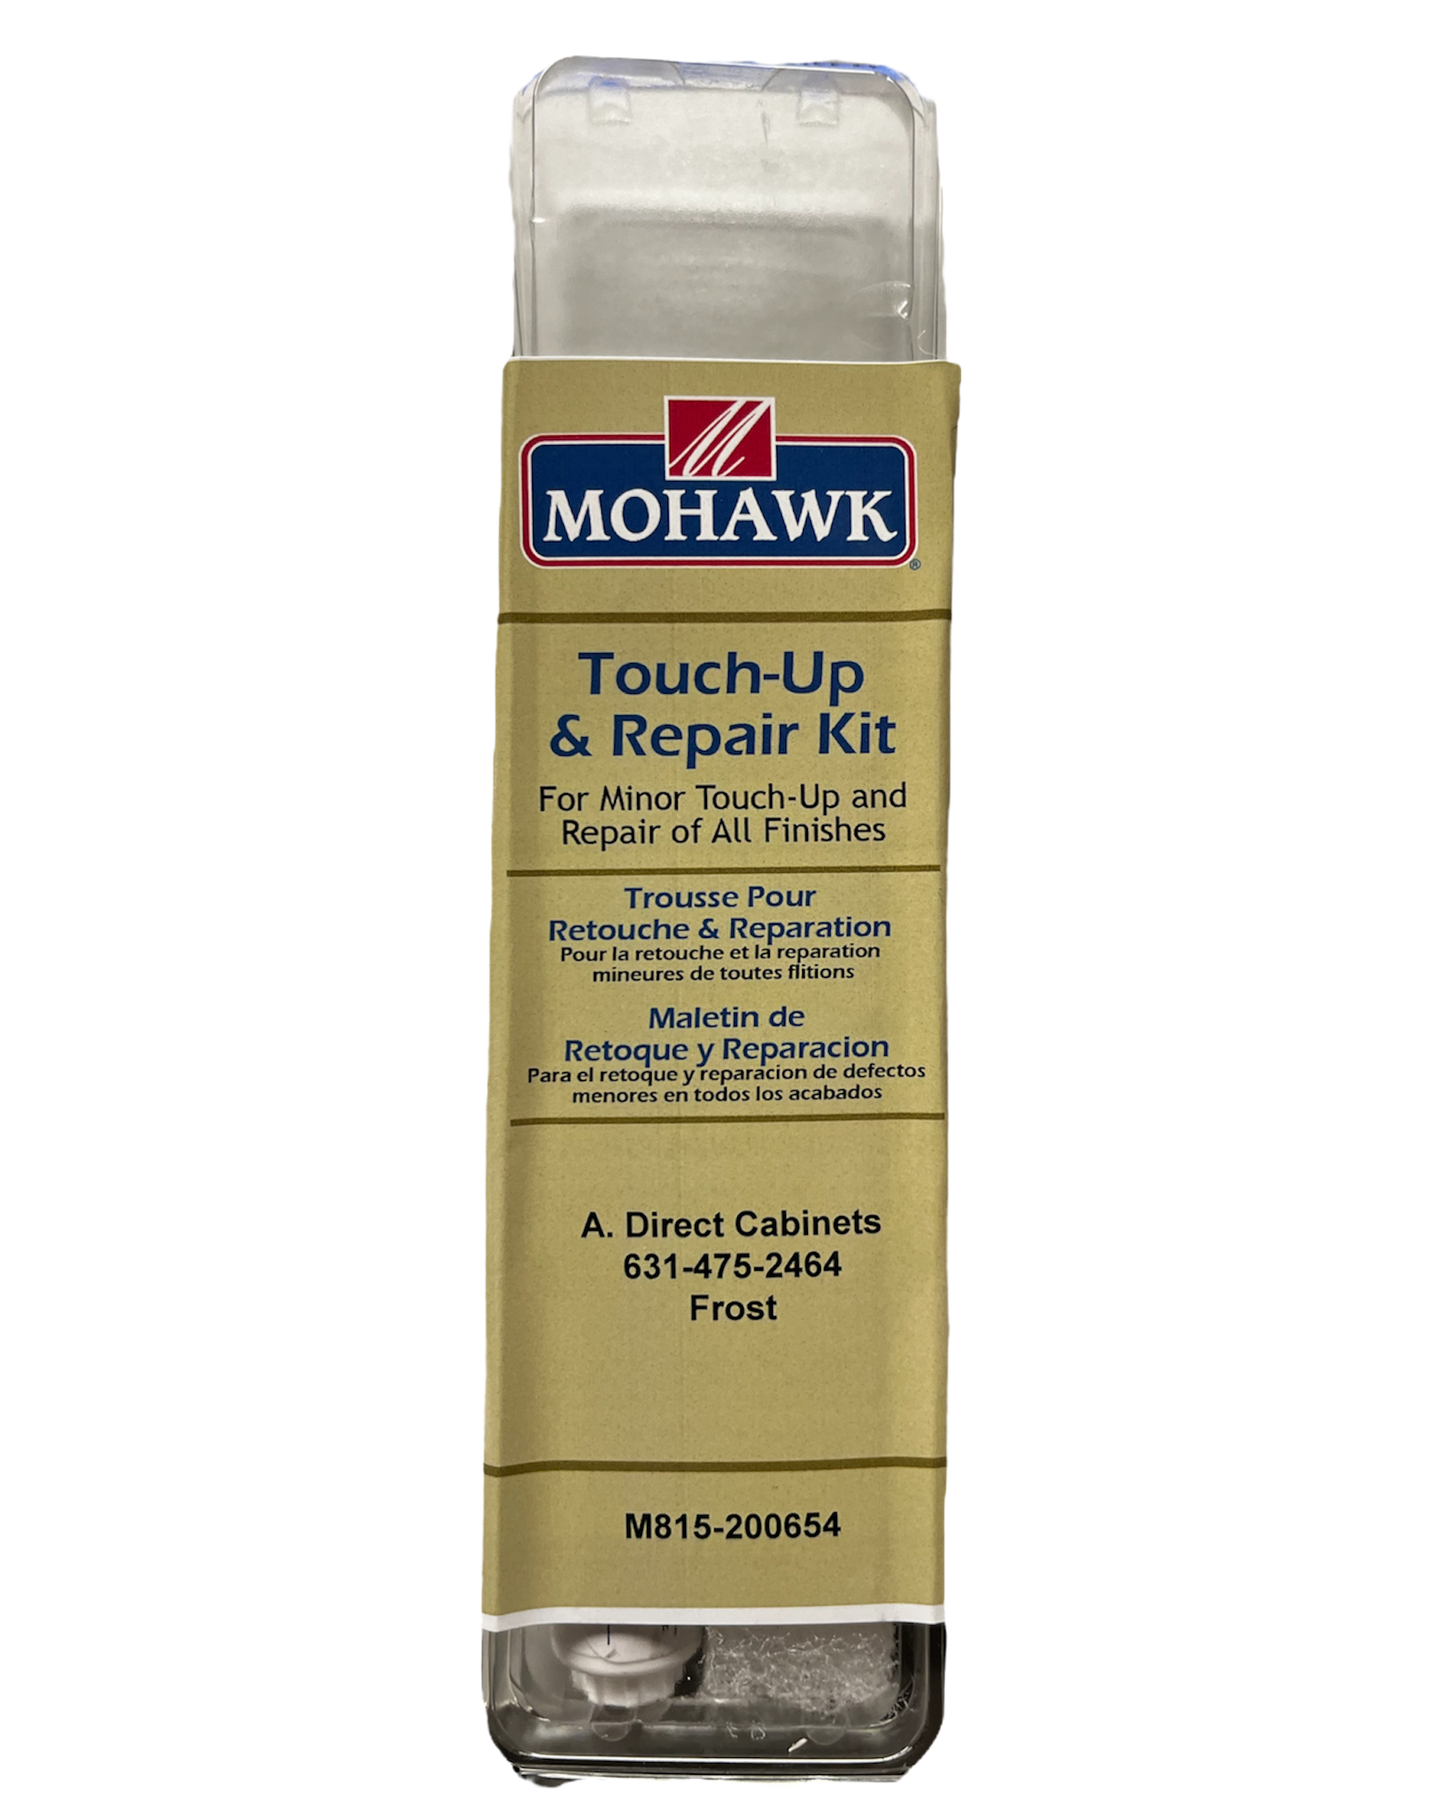 Fabuwood Frost (White Paint) Touch-Up & Repair Kit for Fabuwood Cabinets-DirectCabinets.com